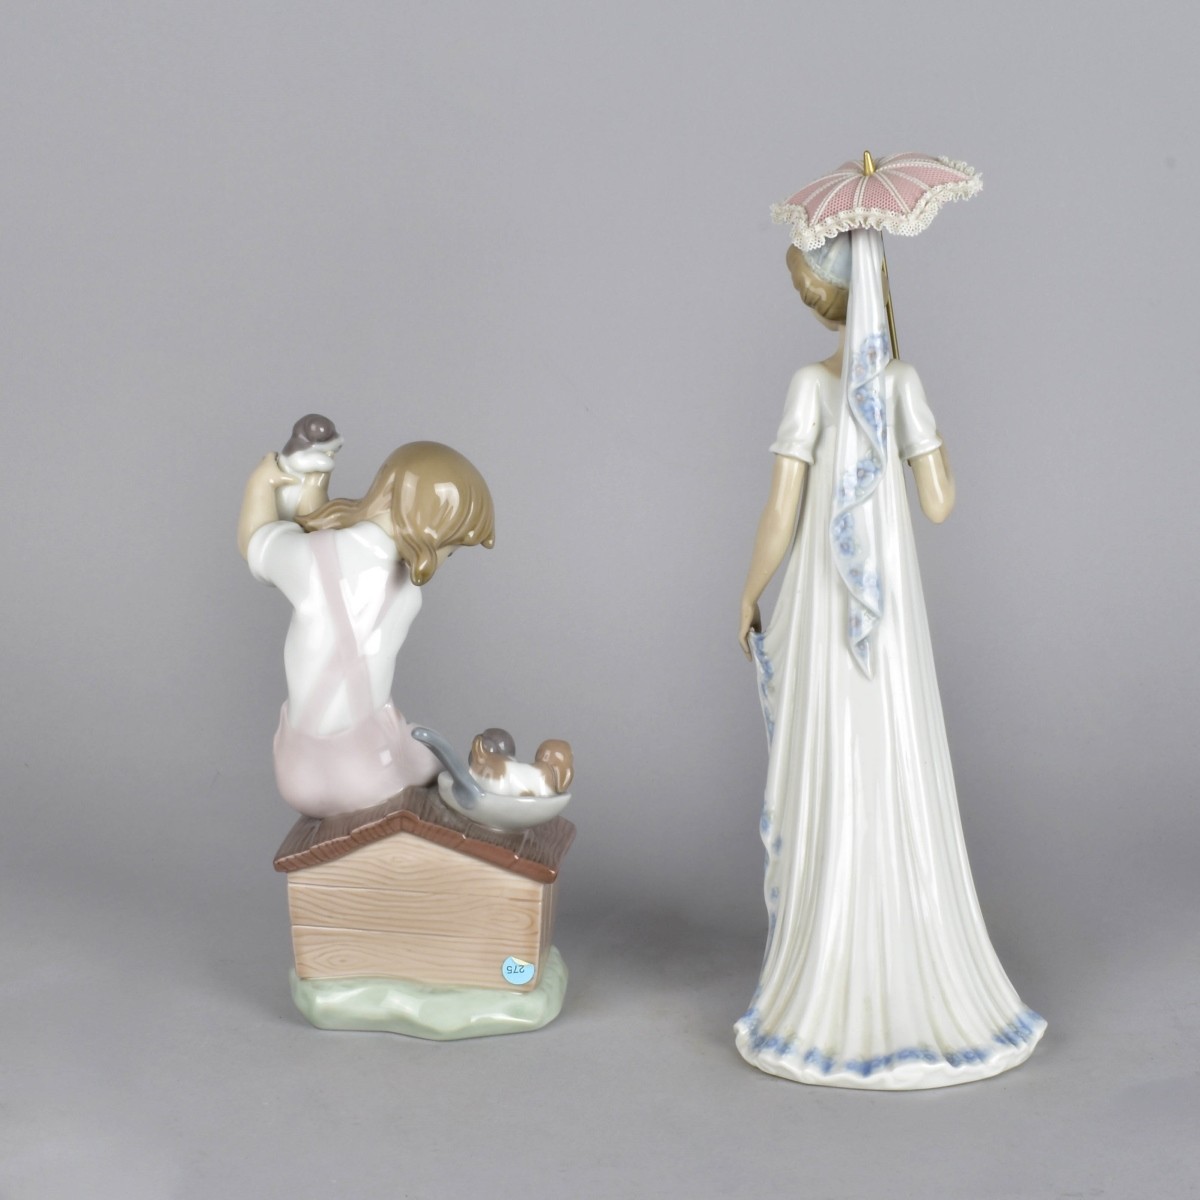 Two Lladro Porcelain Figurines